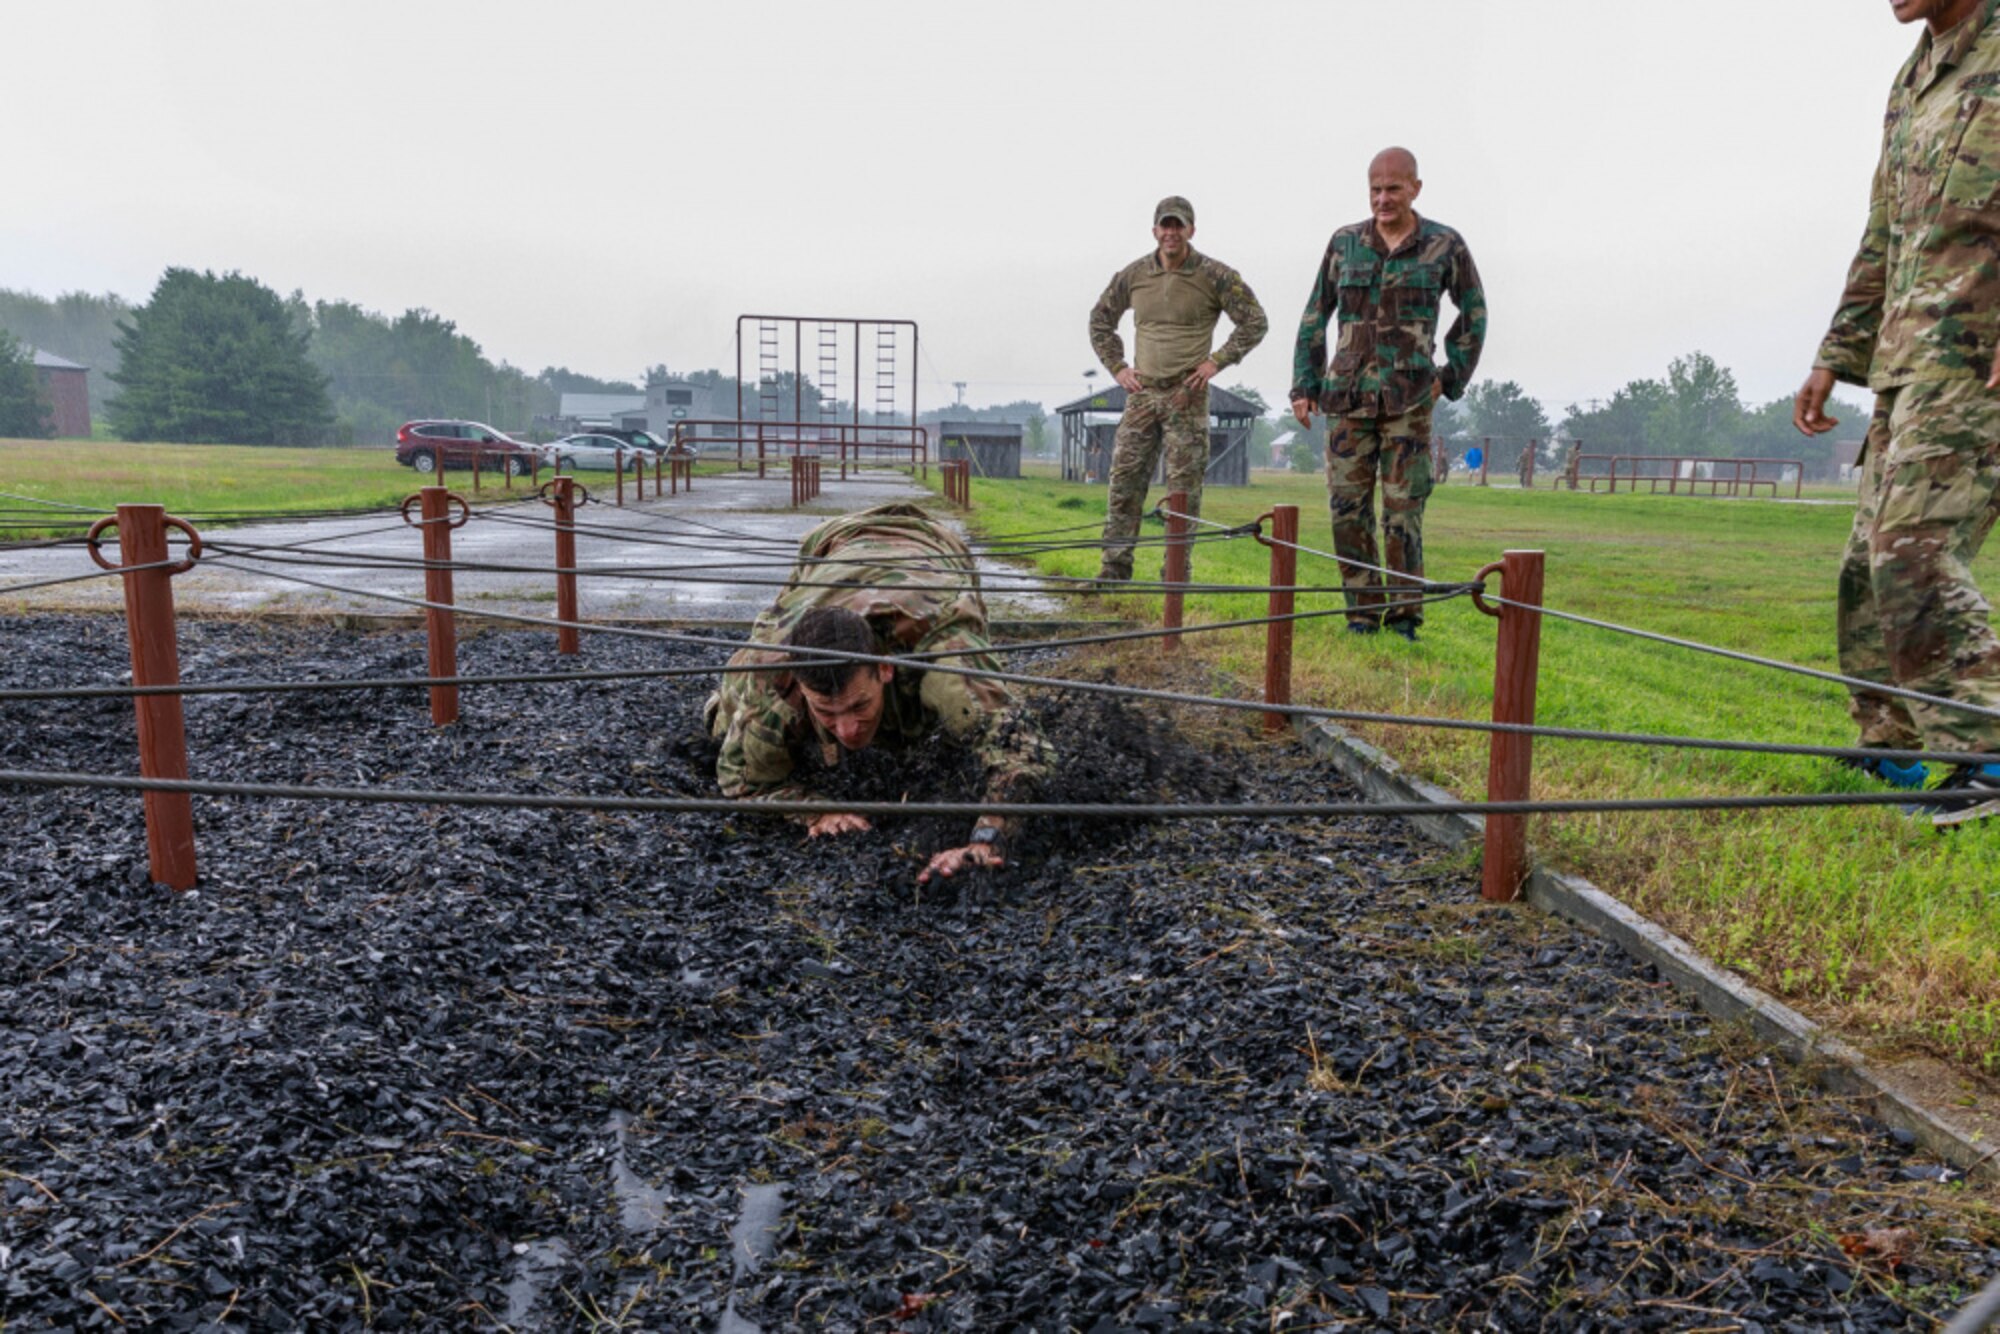 Senior Airman Trevor Thompson, a reservist in the 67th Aerial Port Squadron, navigates under an obstacle on the land obstacle course at Camp Johnson, Vermont as part of the team selection and training event